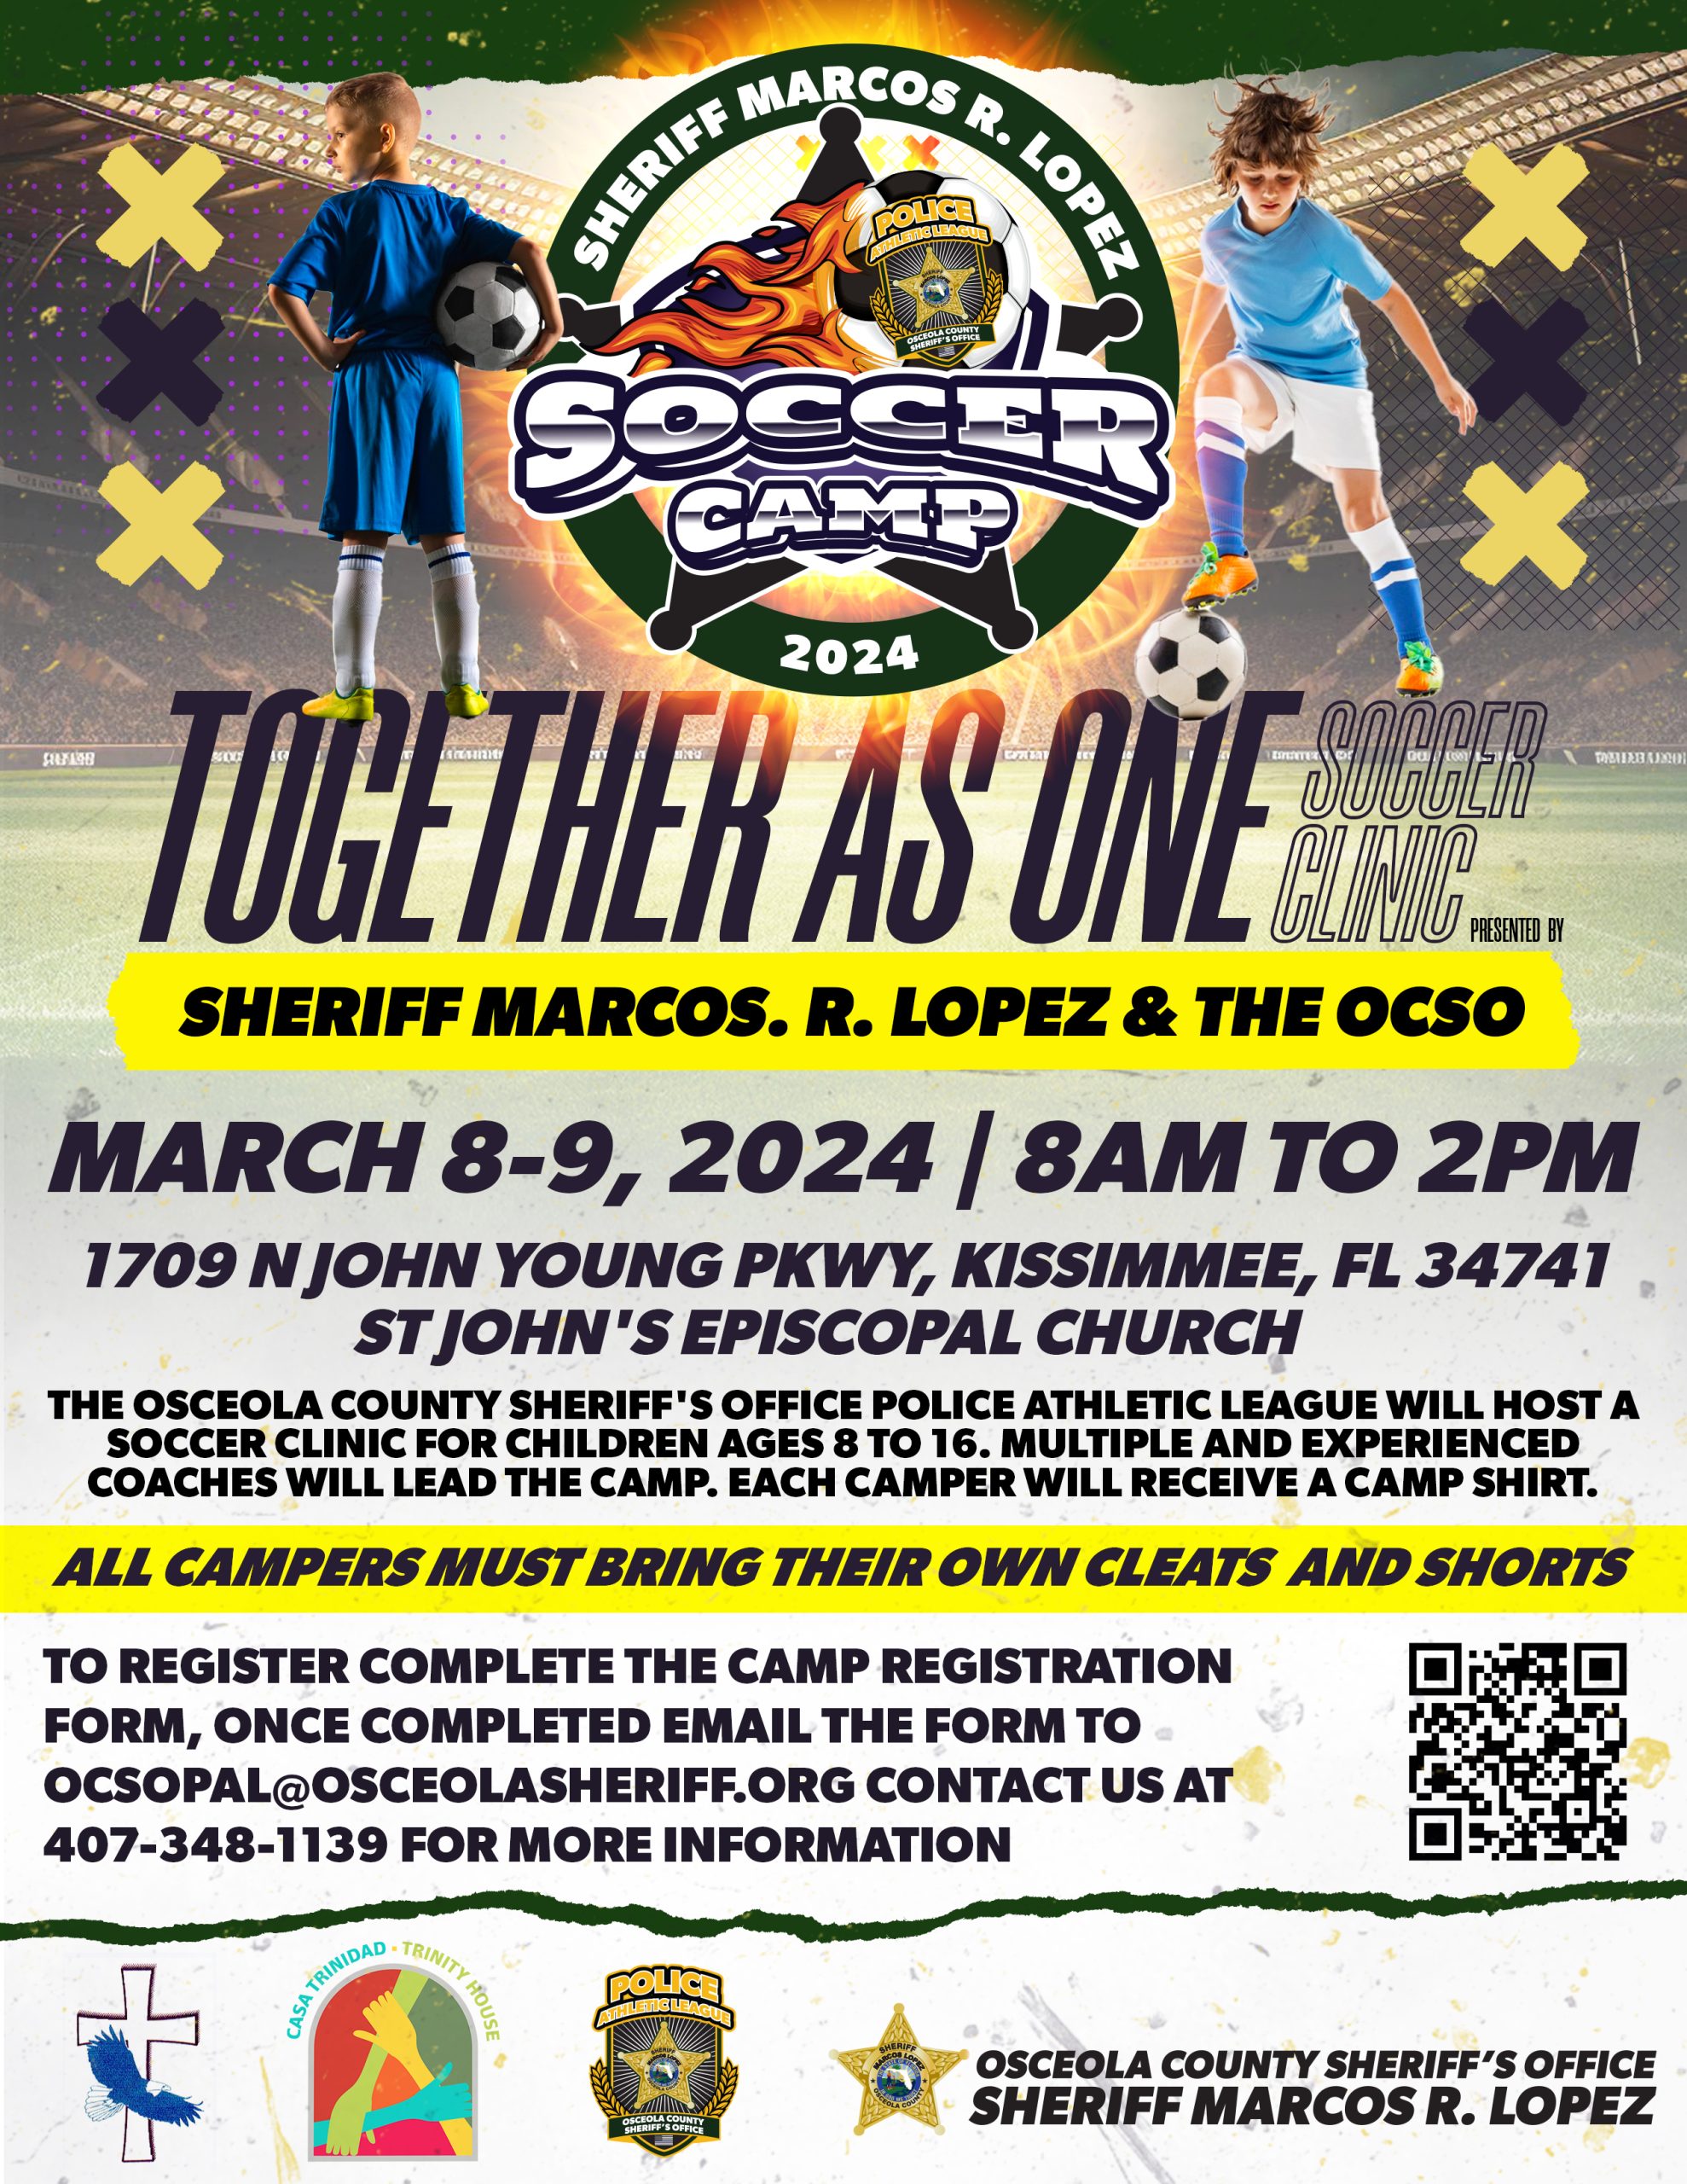 Together As One Soccer Camp